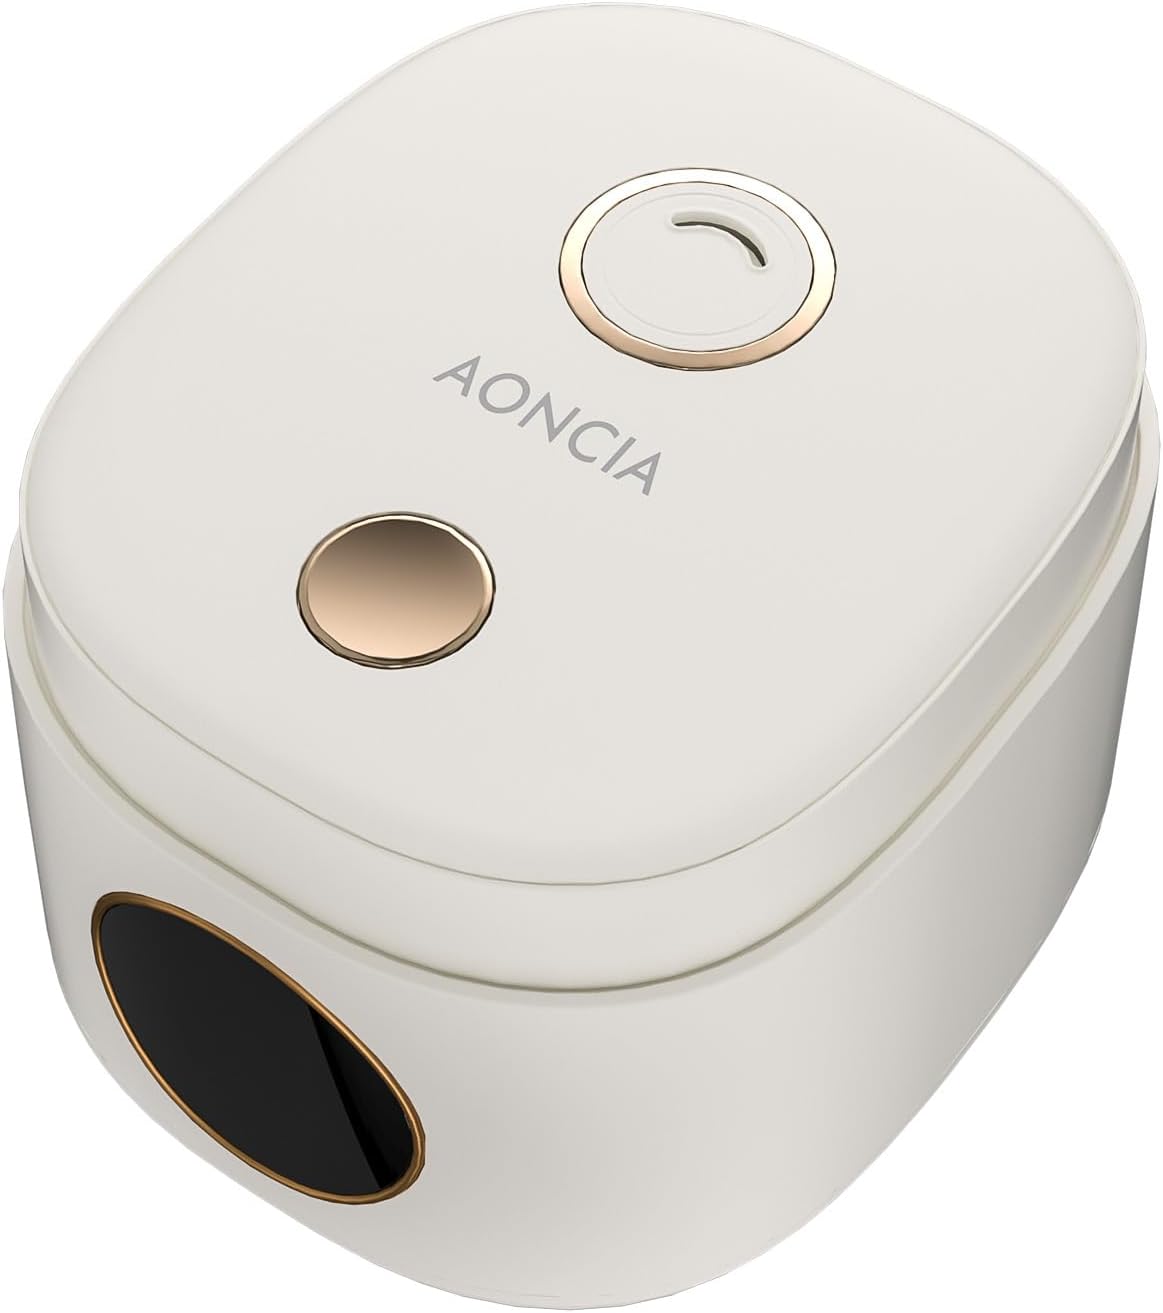 AONCIA Rice Cooker 0.6L S-RC021S White